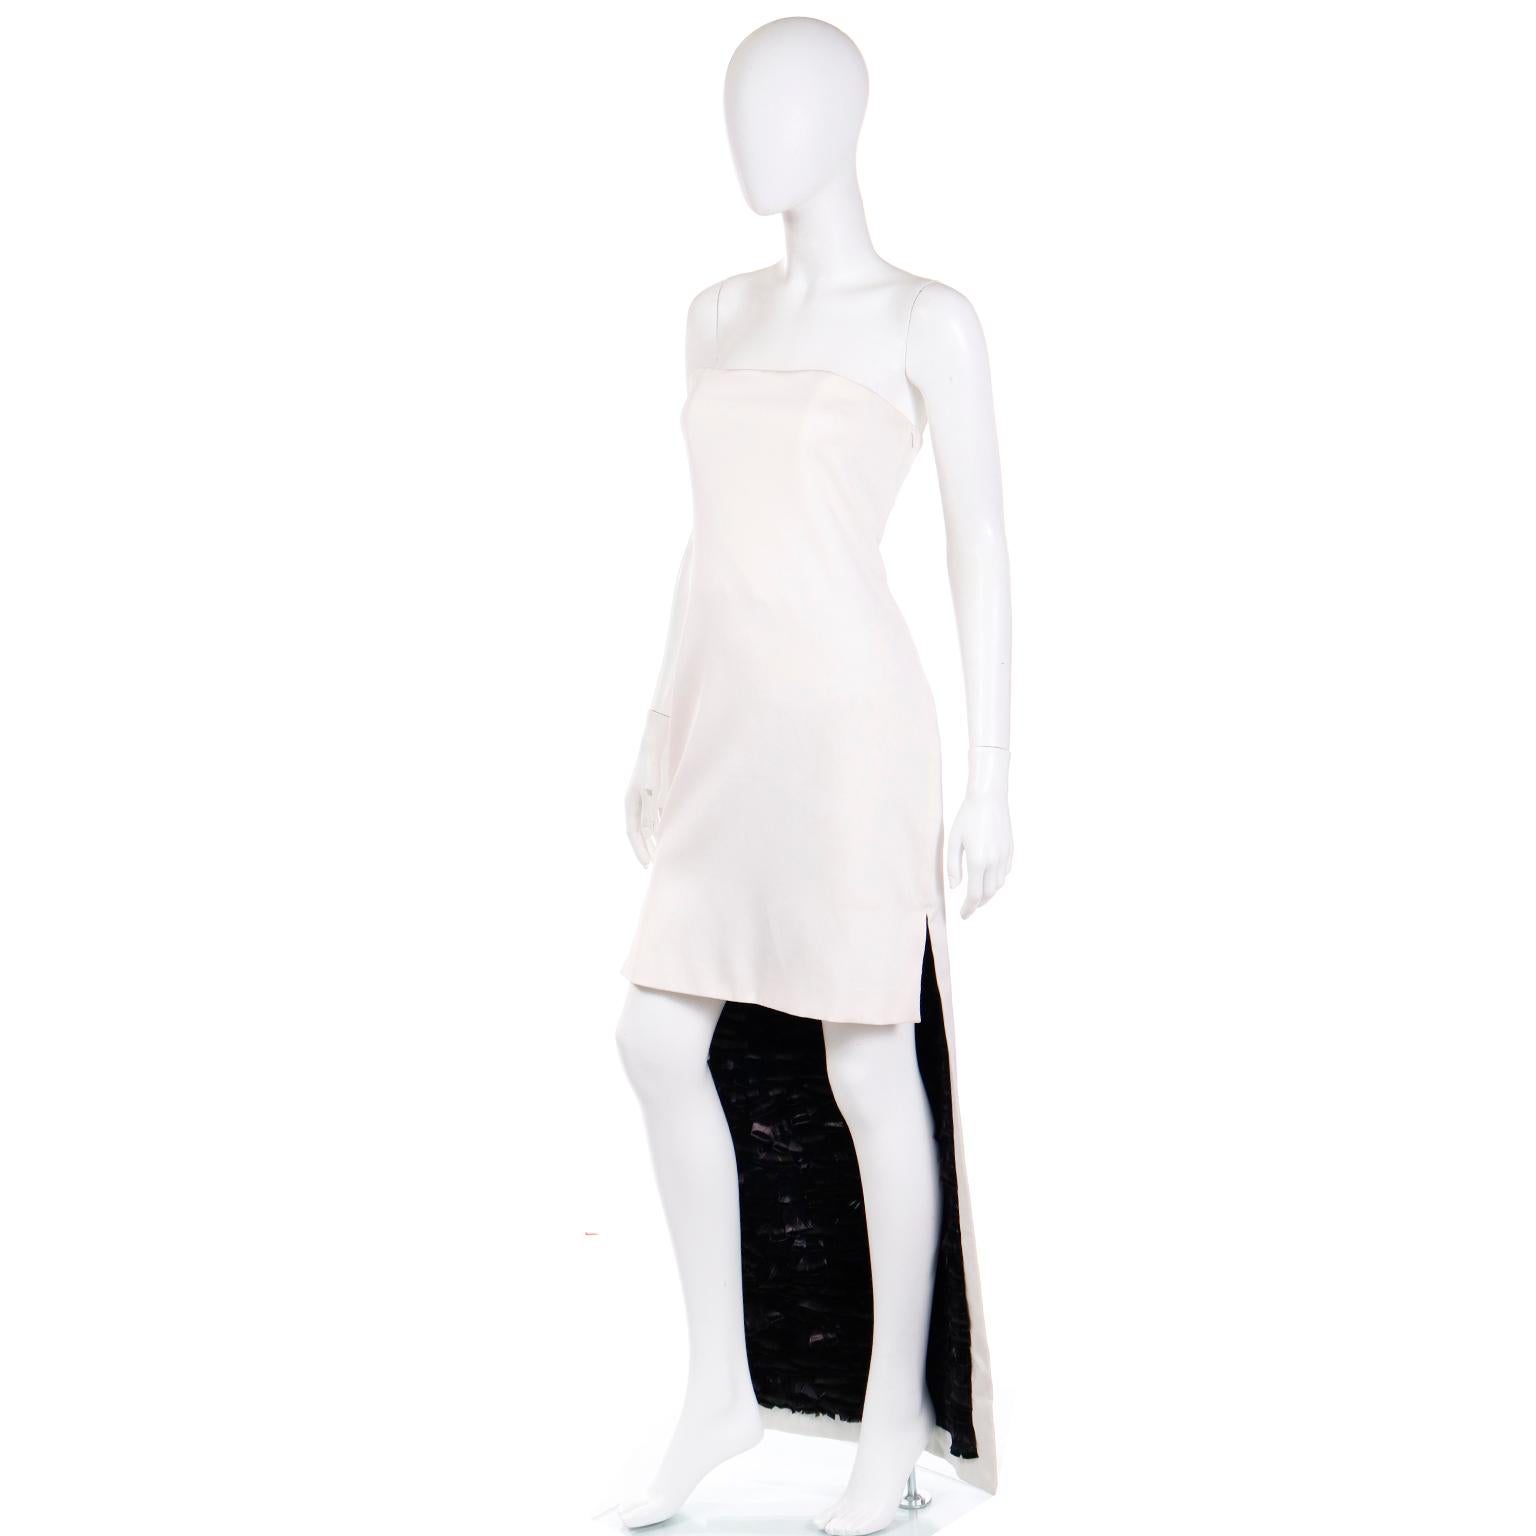 2001 Tom Ford for Yves Saint Laurent Strapless White Dress w Black Feather Train In Excellent Condition For Sale In Portland, OR